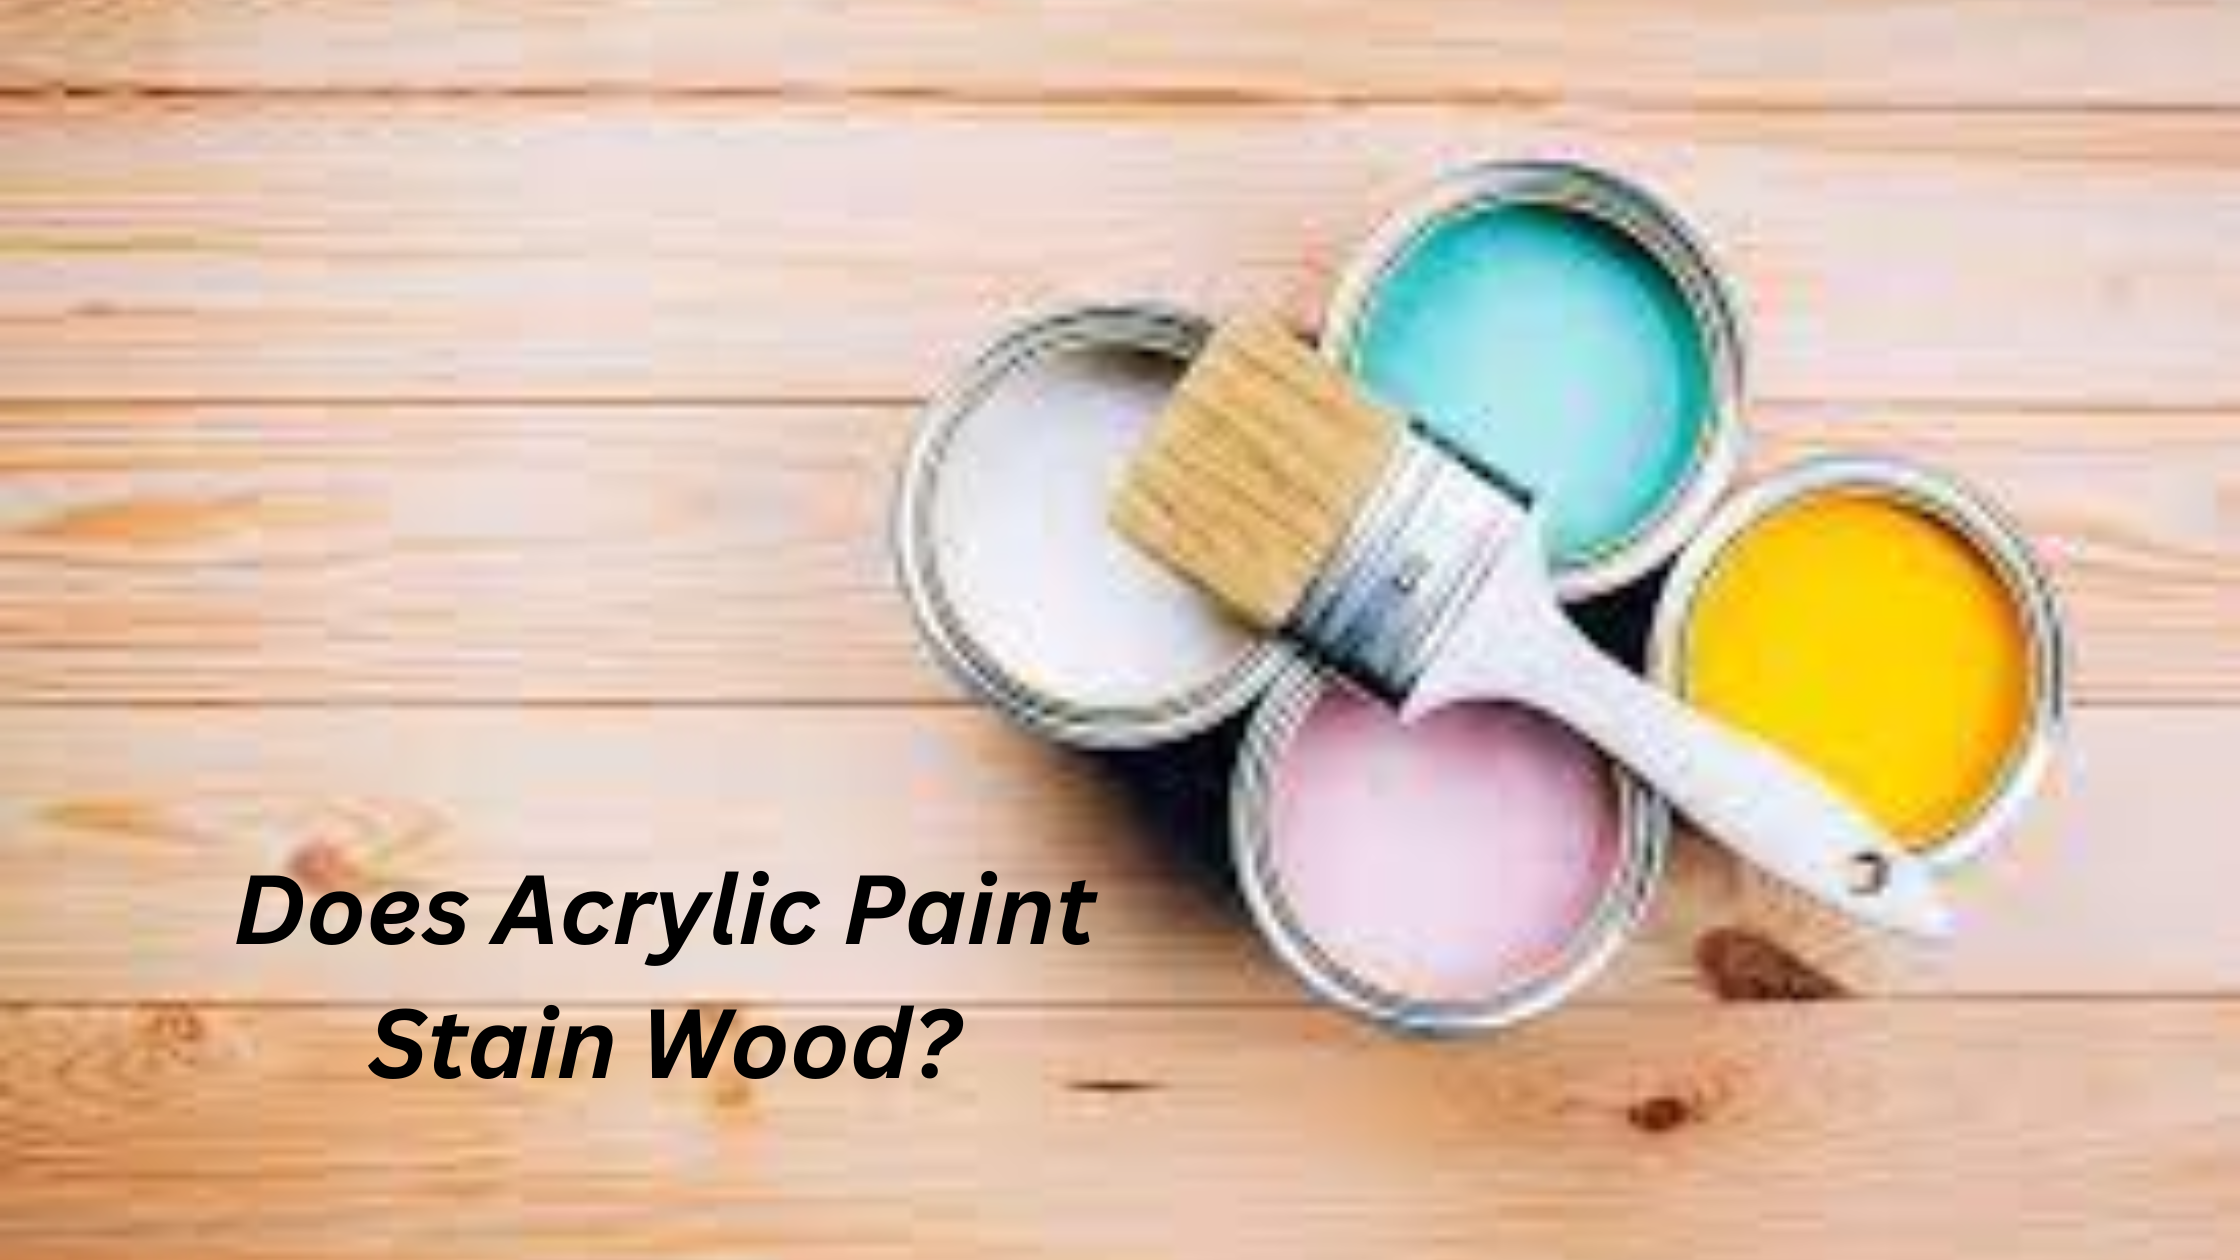 Does Acrylic Paint Stain Wood?